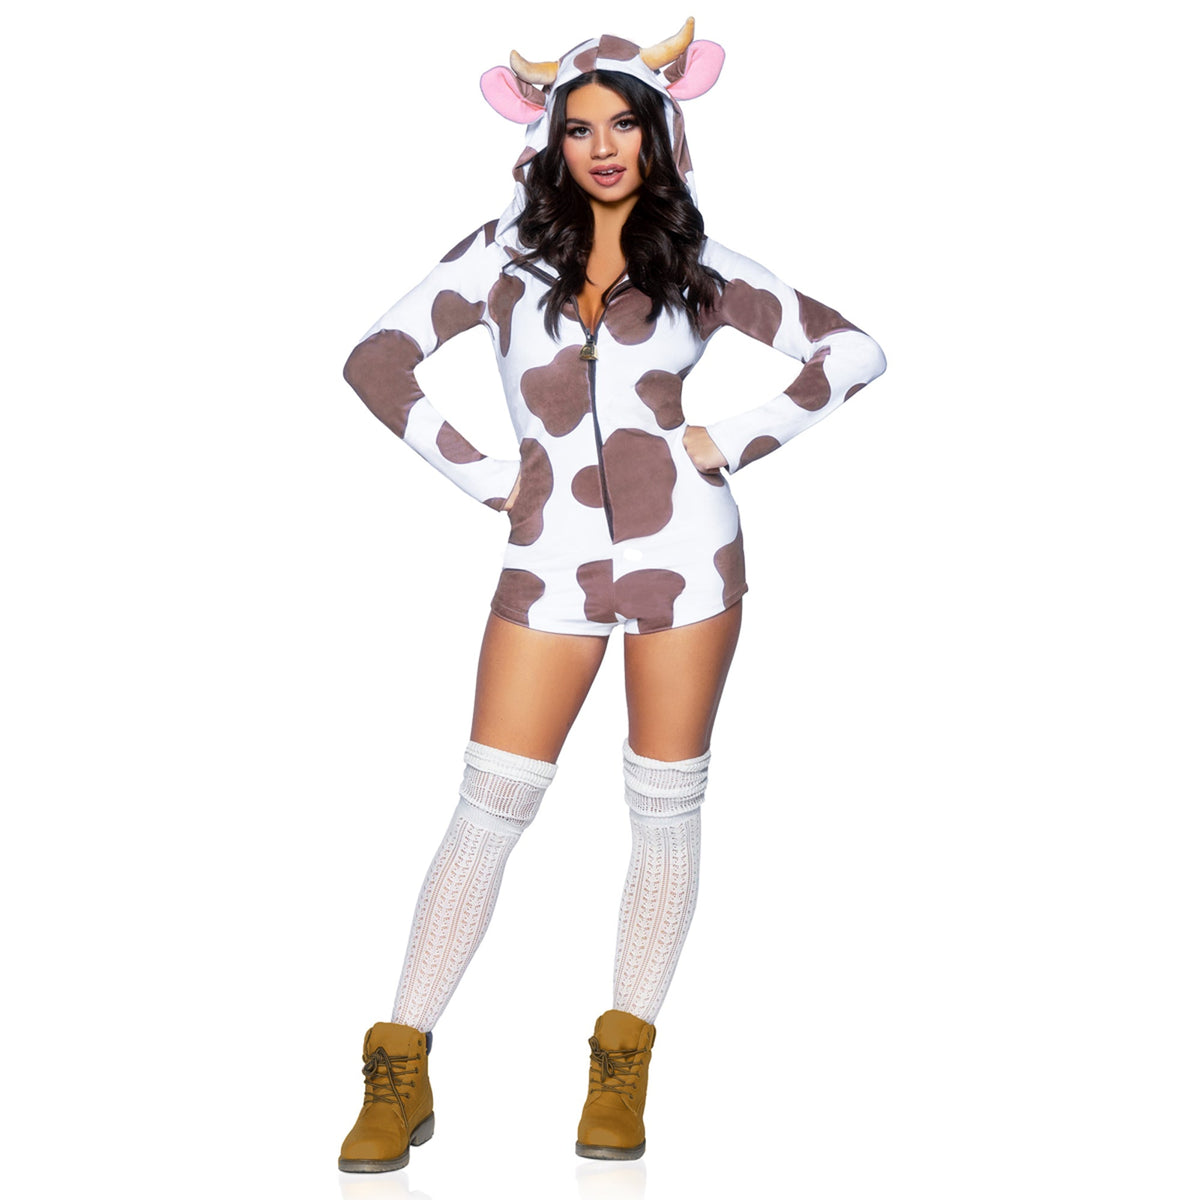 LEG AVENUE/SKU DISTRIBUTORS INC Costumes Ultra Soft Cow Sexy Costume for Adults, Brown and White Romper